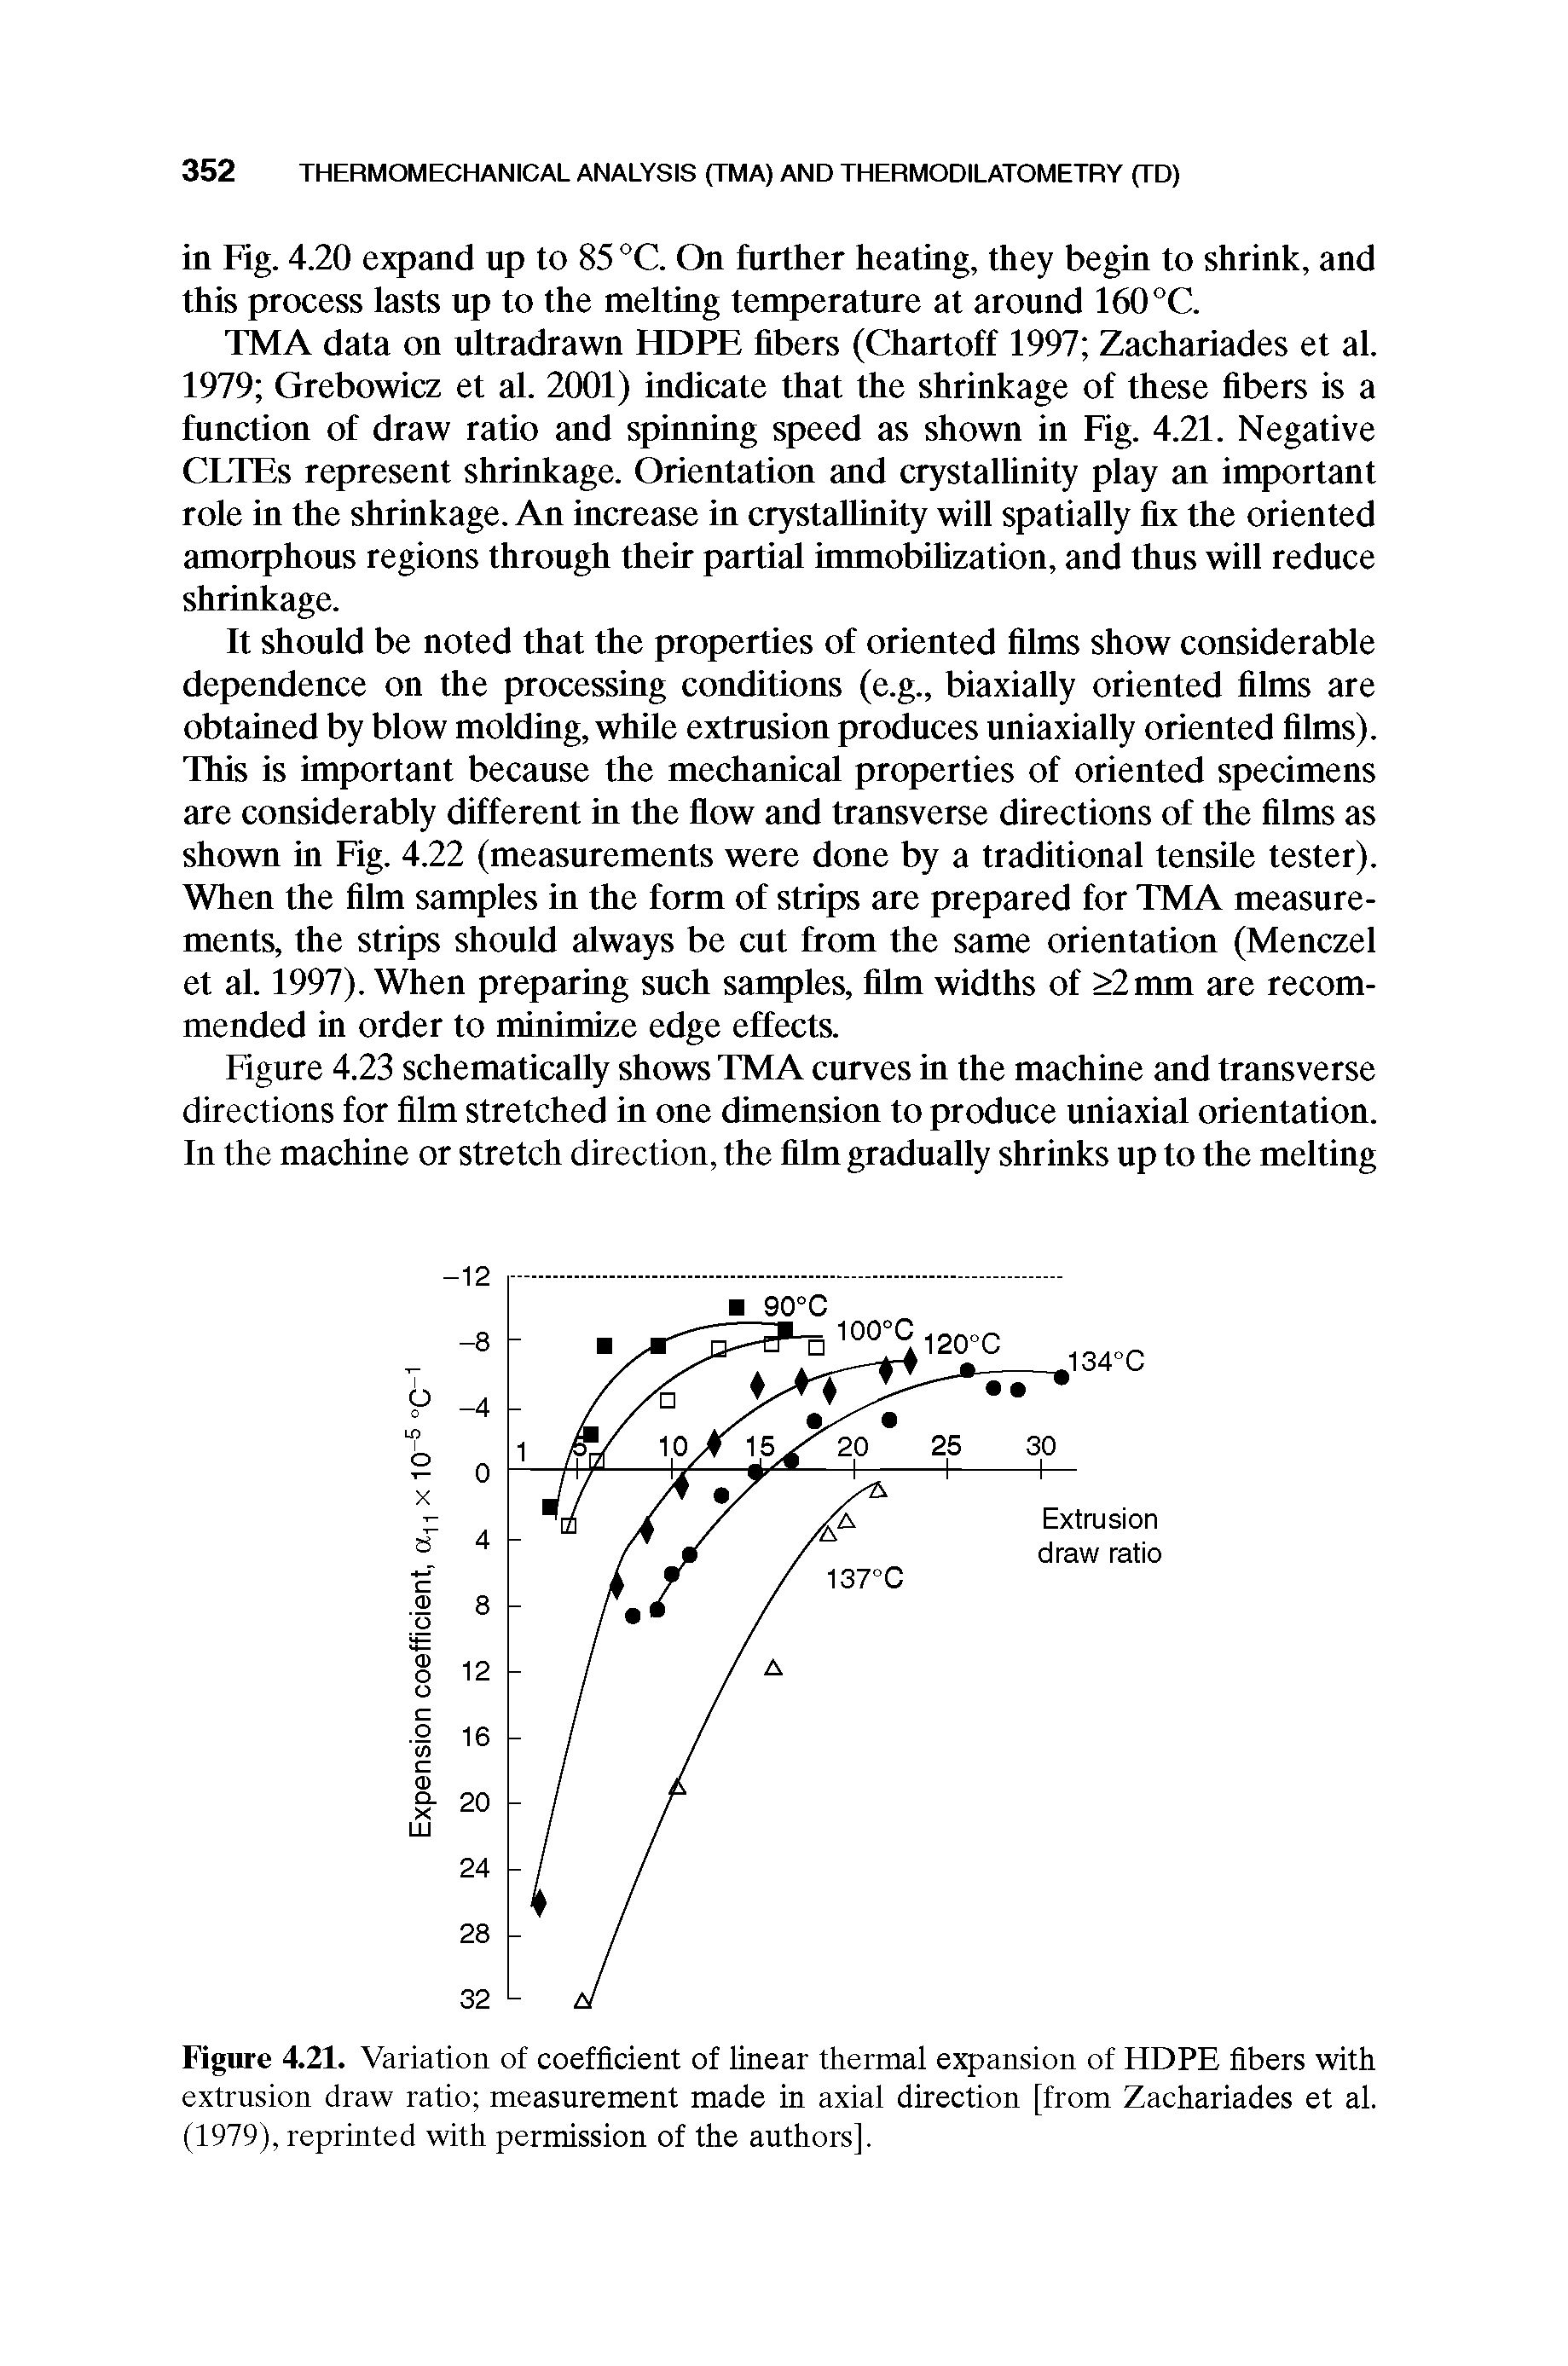 Figure 4.21. Variation of coefficient of linear thermal expansion of HDPE fibers with extrusion draw ratio measurement made in axial direction [from Zachariades et al. (1979), reprinted with permission of the authors].